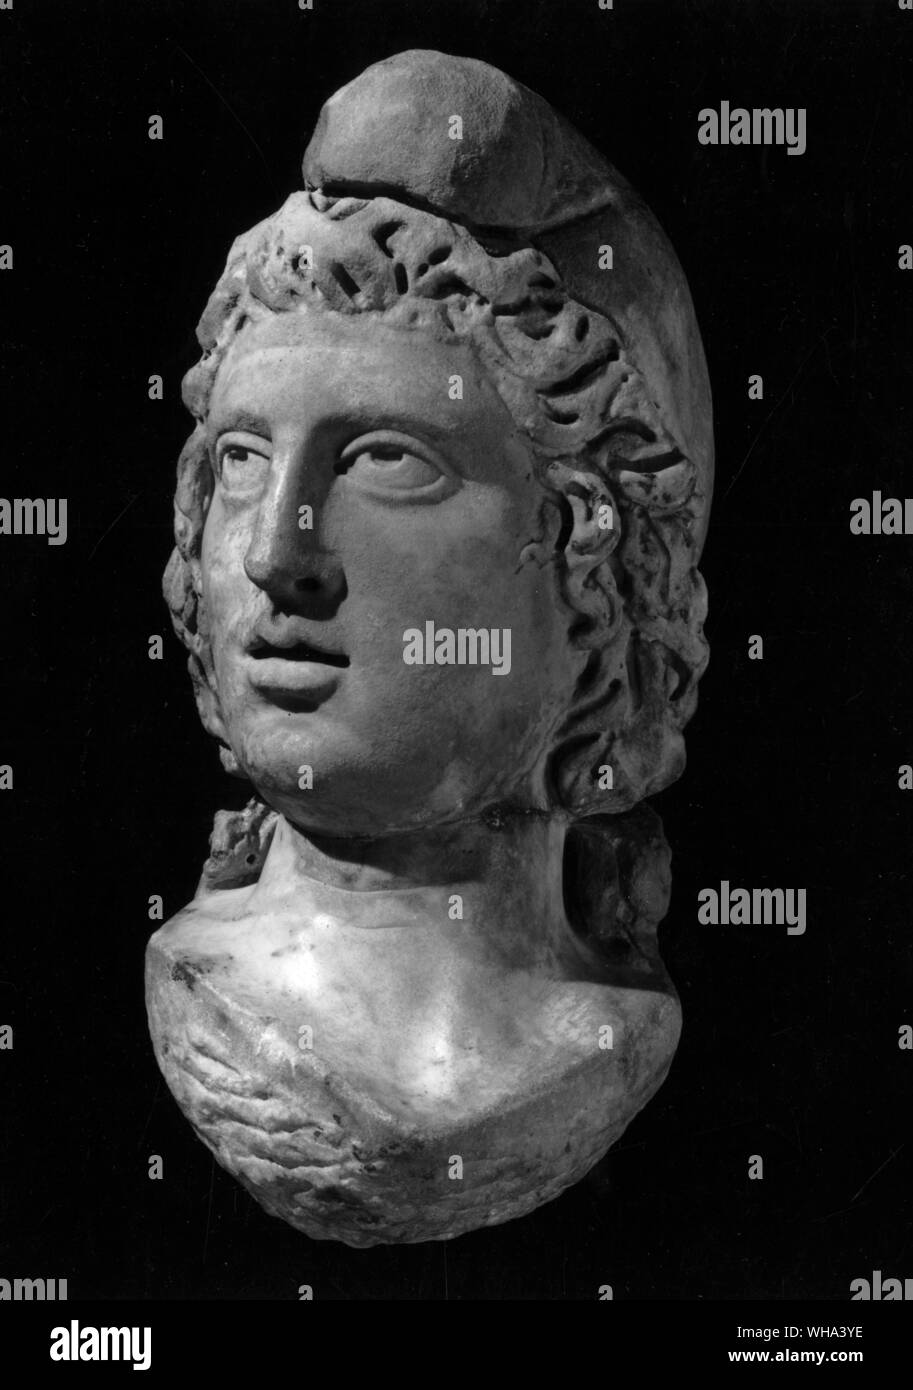 Marble head of Mithras found 1954 at site of 3rd century temple in Walbrook devoted to the Gods worship. The last state pagan religion in Europe was Mithraism. The worship of Mithras, the Invincible Sun god was practised all over the Roman Empire, including the British Isles. The Temples in London and along Hadrian Wall can still be seen today as well some remains in Wales and York. There is no written formal documentation of the Western style of Mithraic Mysteries, the Roman 'Cult of Mithras'. The underground Temples and their paintings, statues and few anti-pagan documents by early Stock Photo